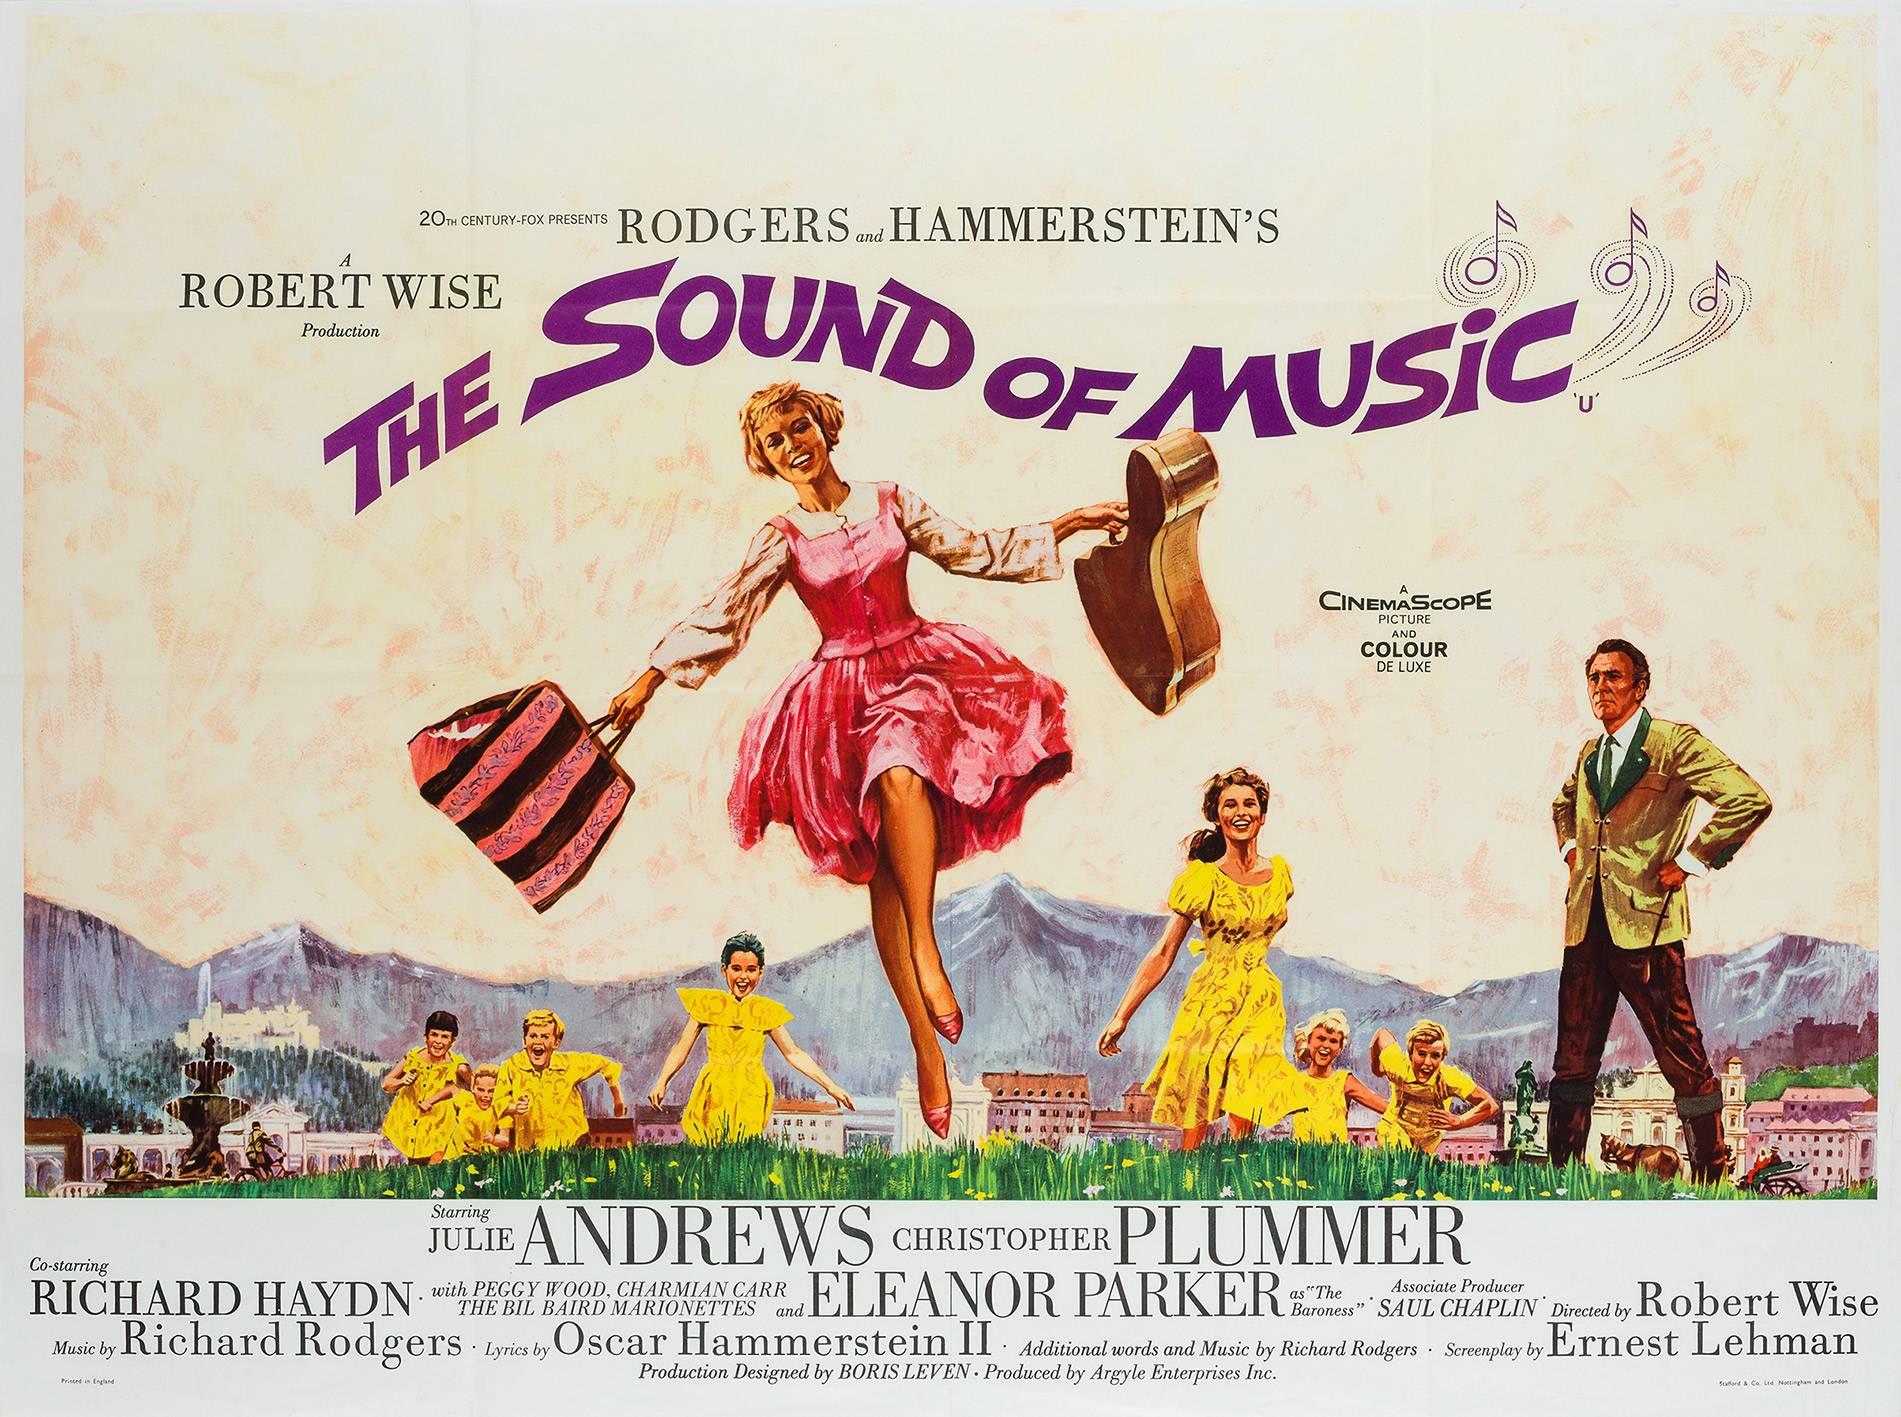 Wonderful first-year-of-release poster for firm movie favourite The Sound of Music. The Terpning artwork works especially well on the British landscape-oriented quad poster.

Poster size is 30 x 40 1/4 inches.

Excellent/Near mint folded vintage